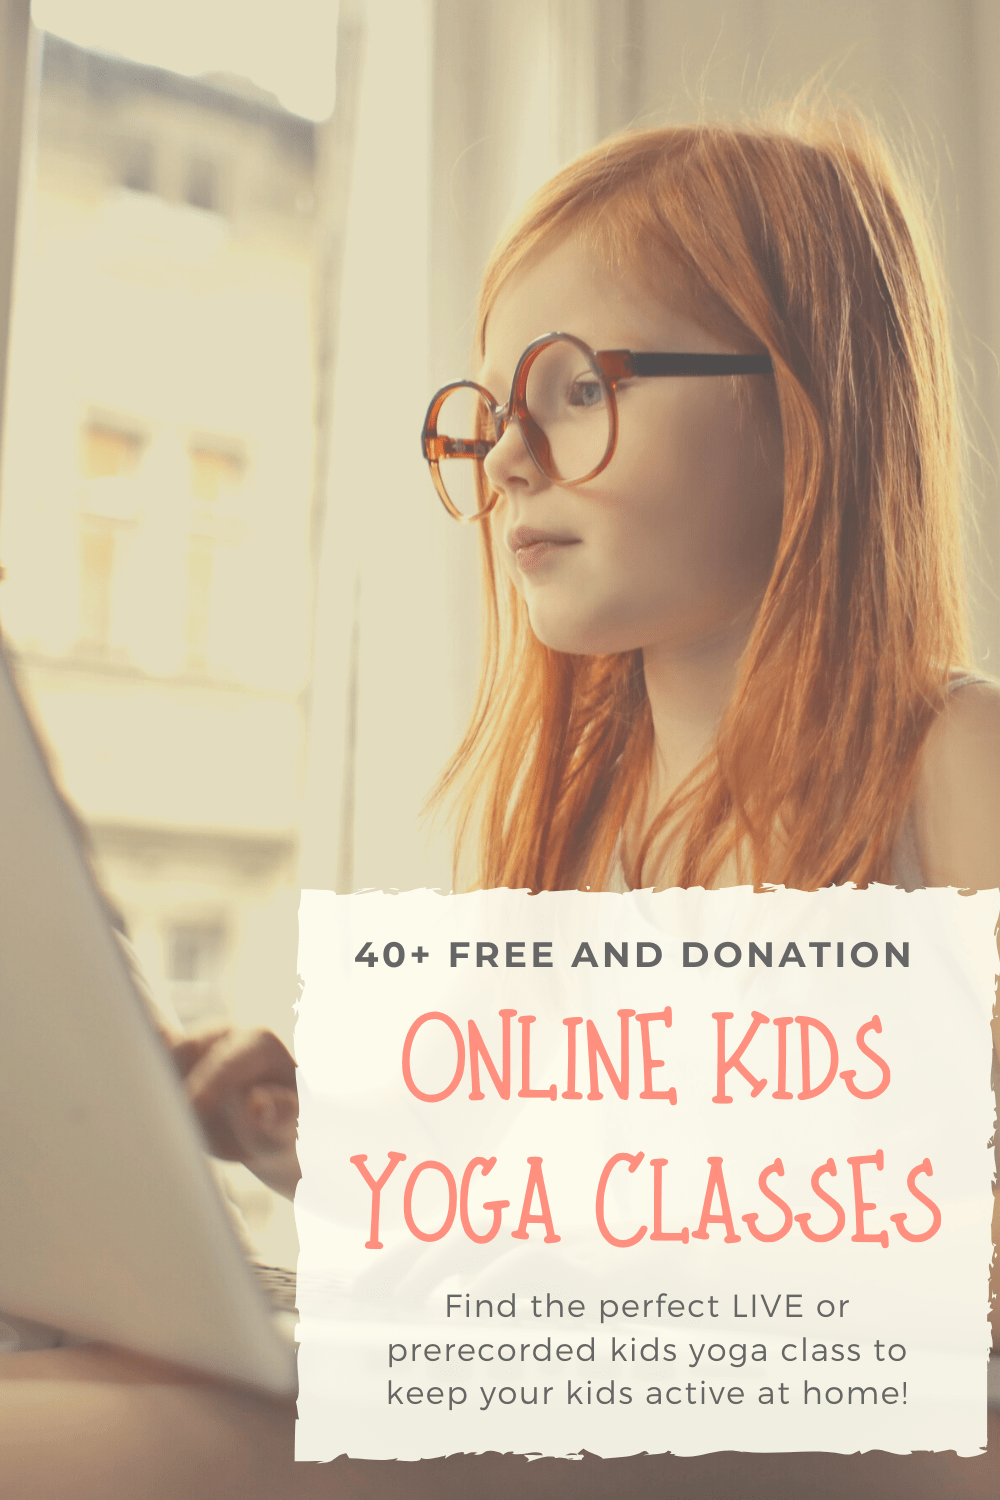 40 free and donation online kids yoga classes - find the perfect live or prerecorded kids yoga class to keep your kids active at home